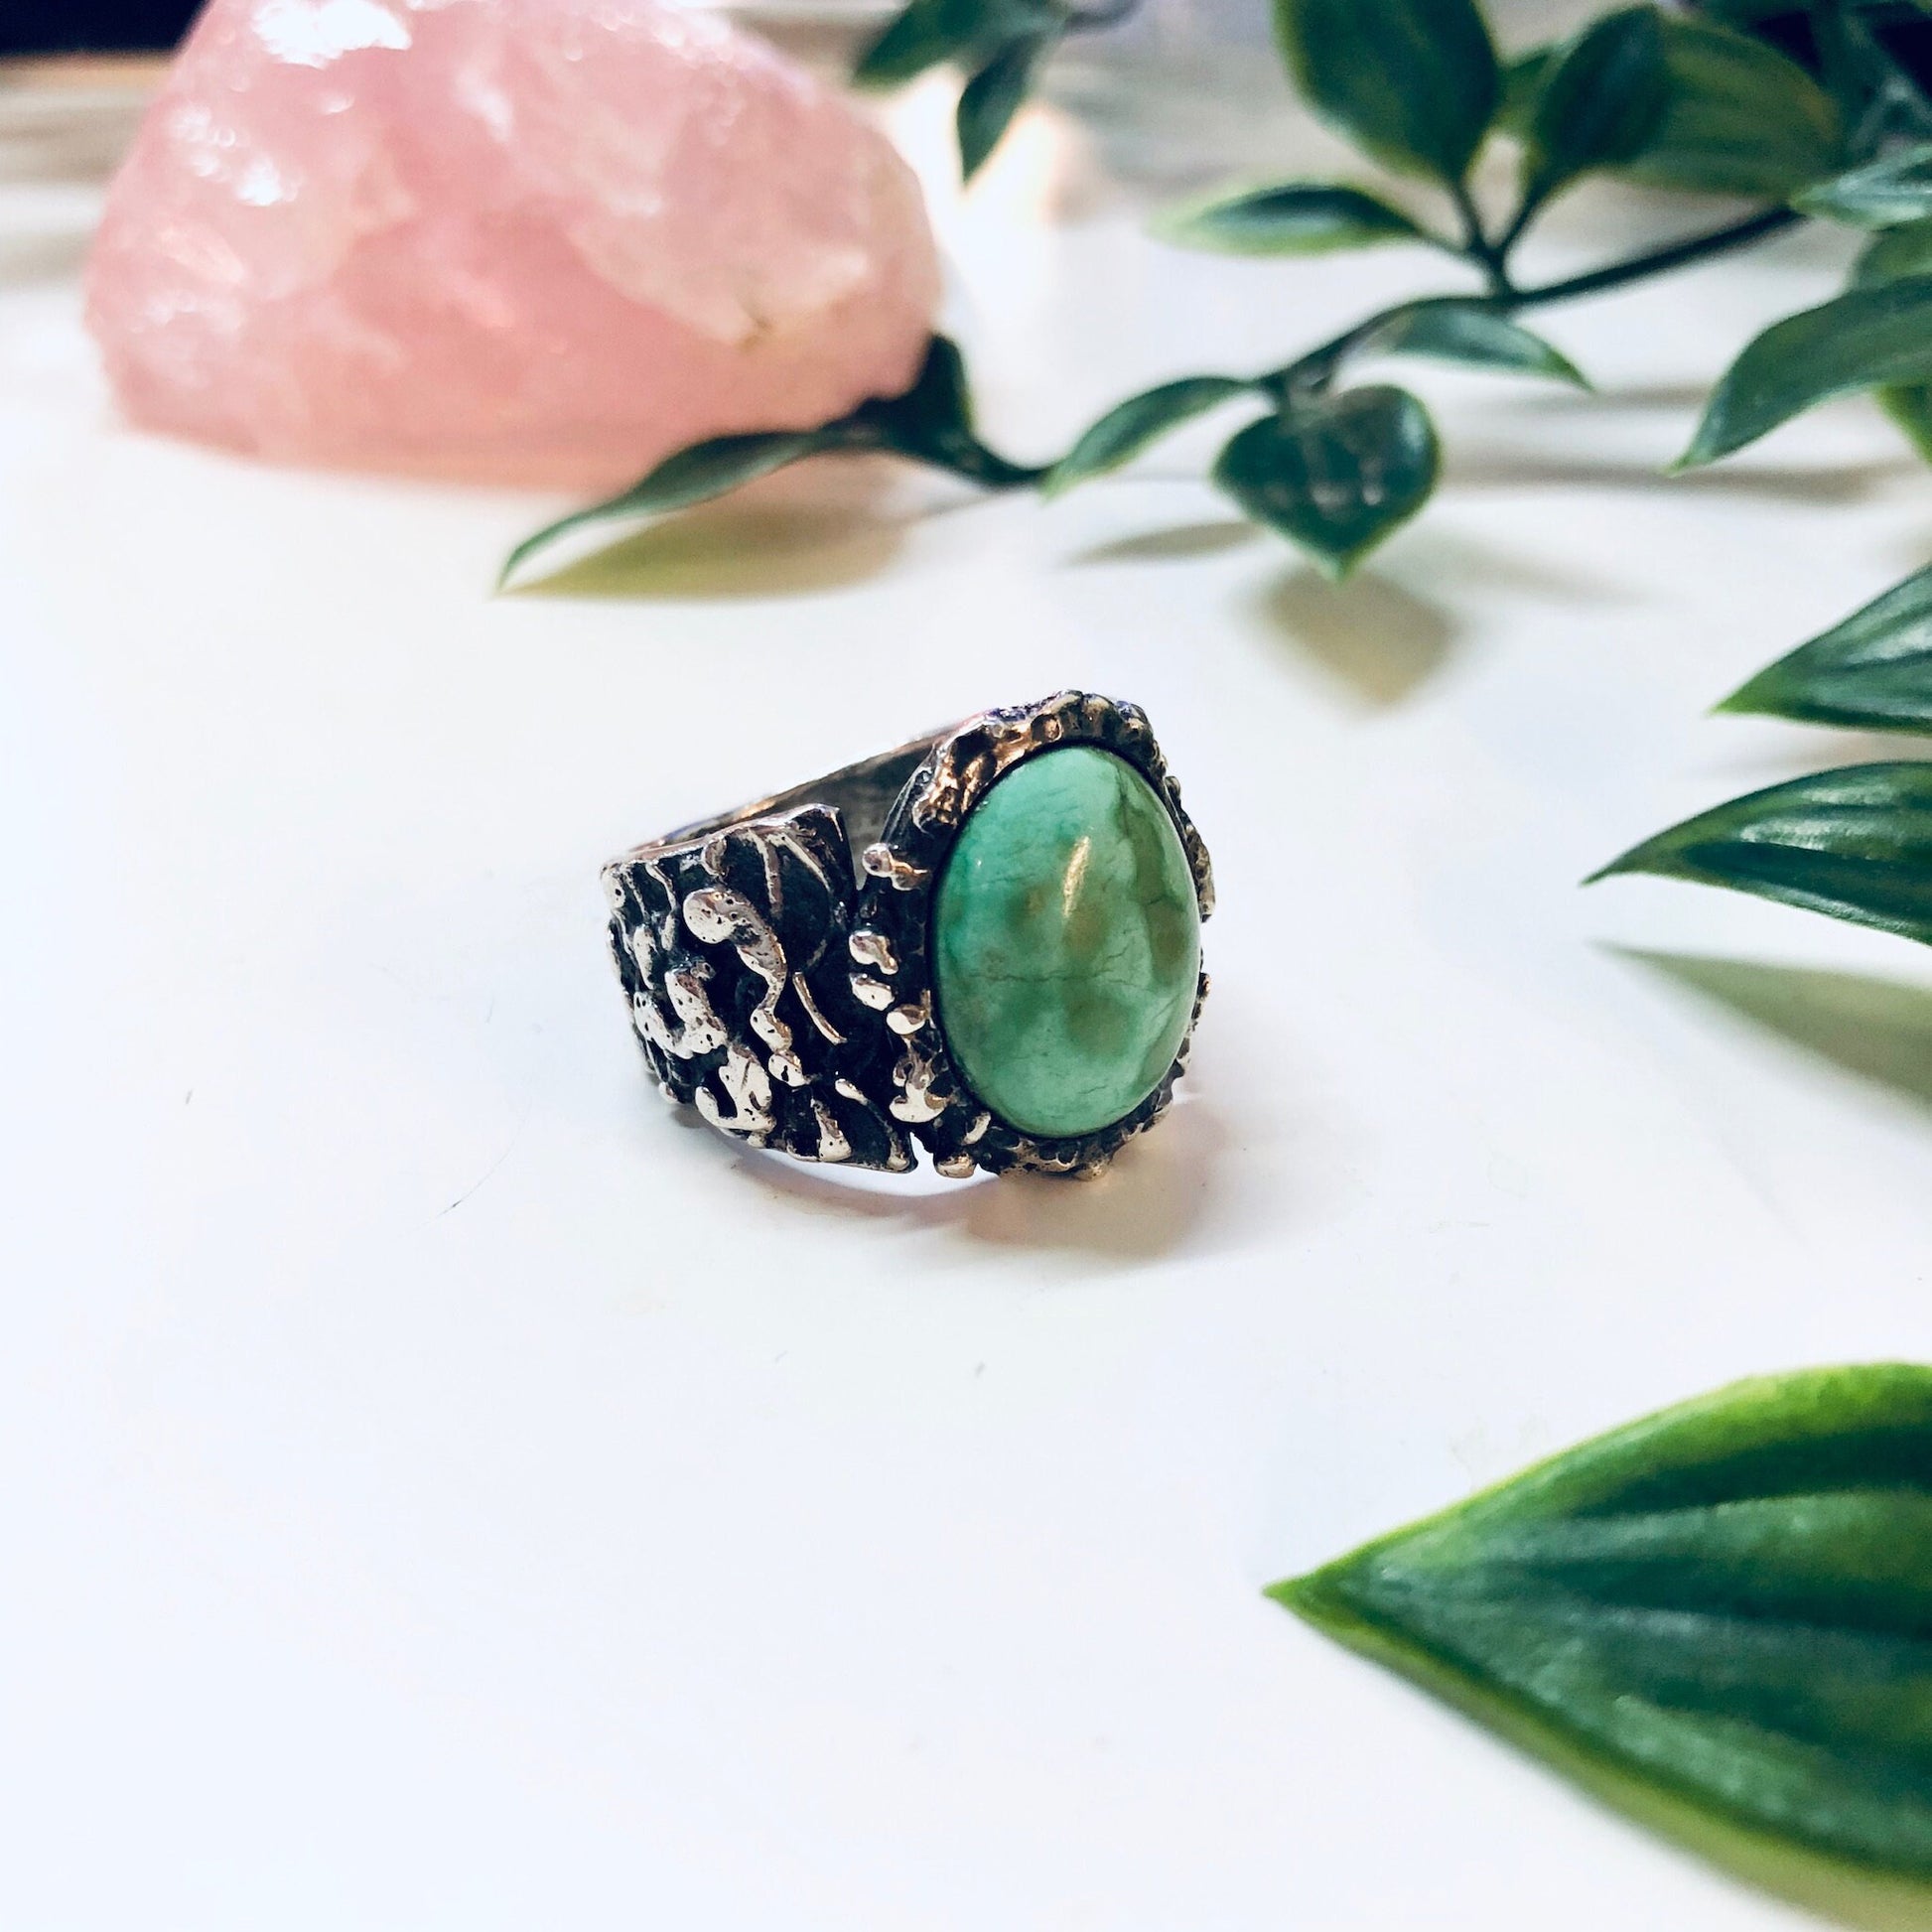 Vintage silver ring with an oval turquoise stone set in an ornate, textured sterling silver band, photographed with green foliage and a rose quartz crystal.